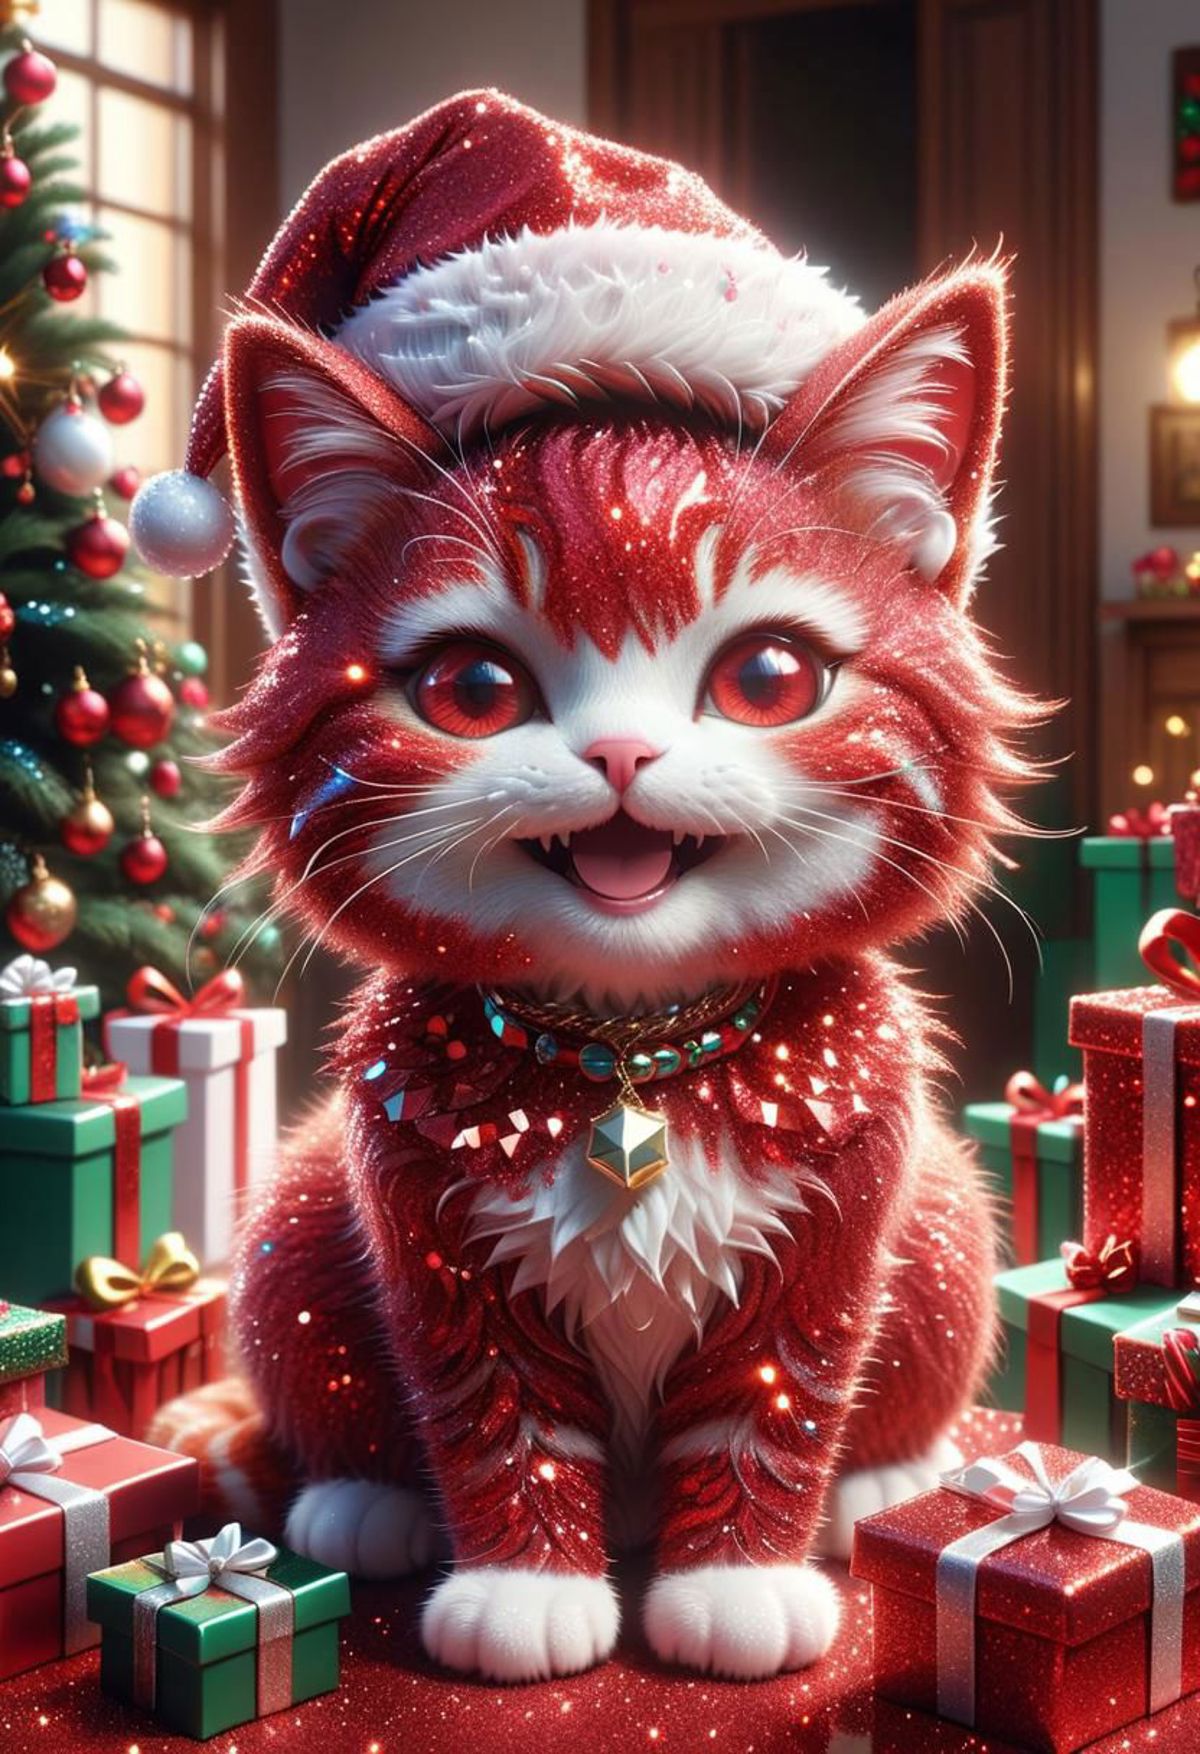 A red and white cat wearing a Santa hat and a green collar, sitting in front of a Christmas tree.